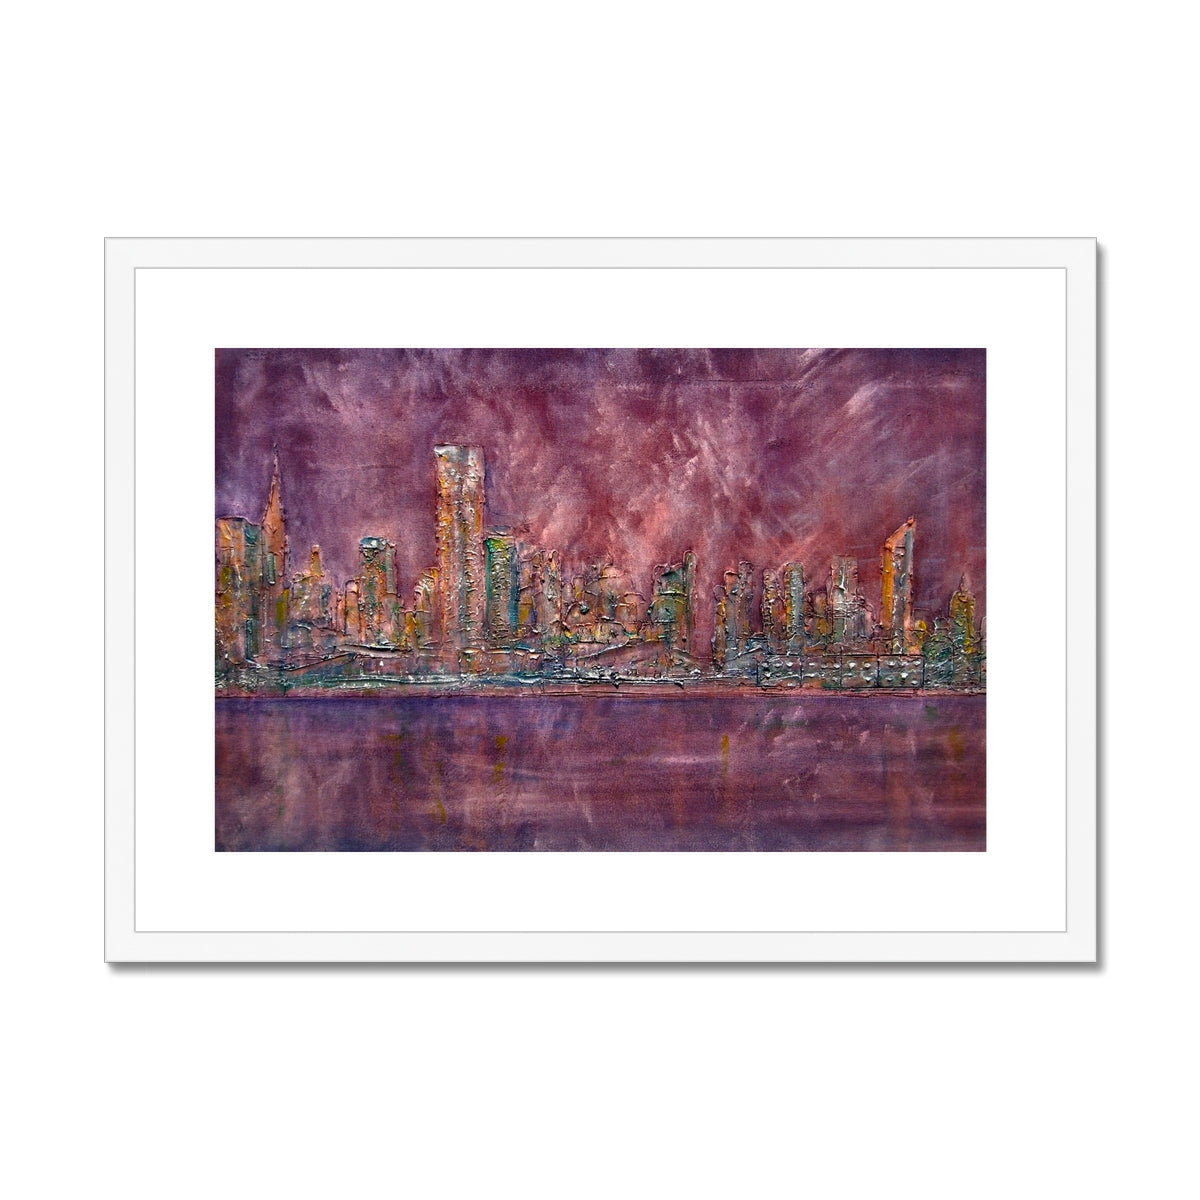 East Side Snow New York Painting | Framed & Mounted Prints From Scotland-Framed & Mounted Prints-World Art Gallery-A2 Landscape-White Frame-Paintings, Prints, Homeware, Art Gifts From Scotland By Scottish Artist Kevin Hunter